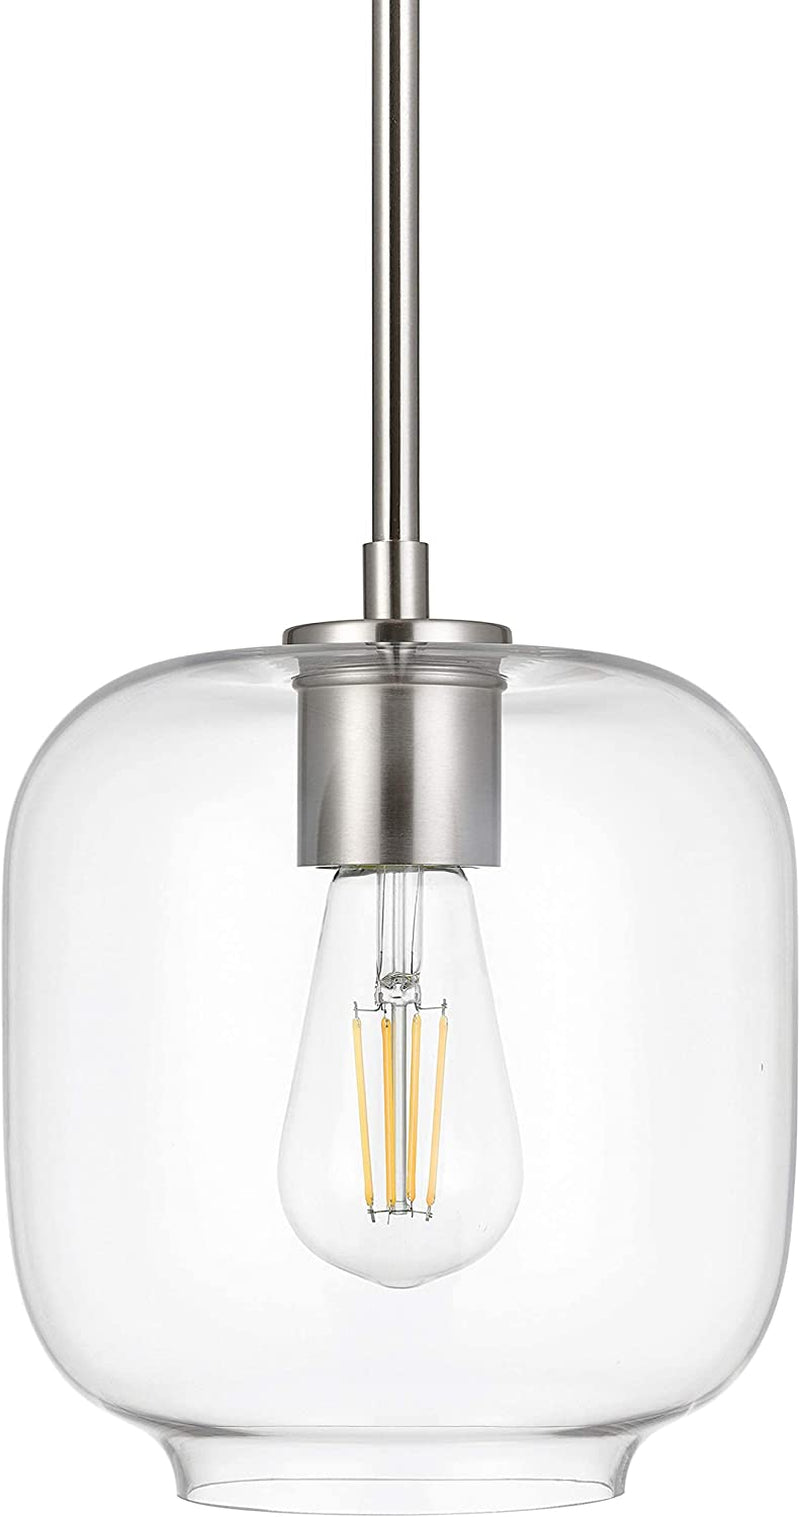 Linea Di Liara Macaria Modern Glass Farmhouse Pendant Lighting for Kitchen Island and over Sink Lighting Fixtures Matte Black Pendant Light Hanging Ceiling Light Angled Clear Glass Shade, UL Listed Home & Garden > Lighting > Lighting Fixtures Linea di Liara Brushed Nickel Piarra 